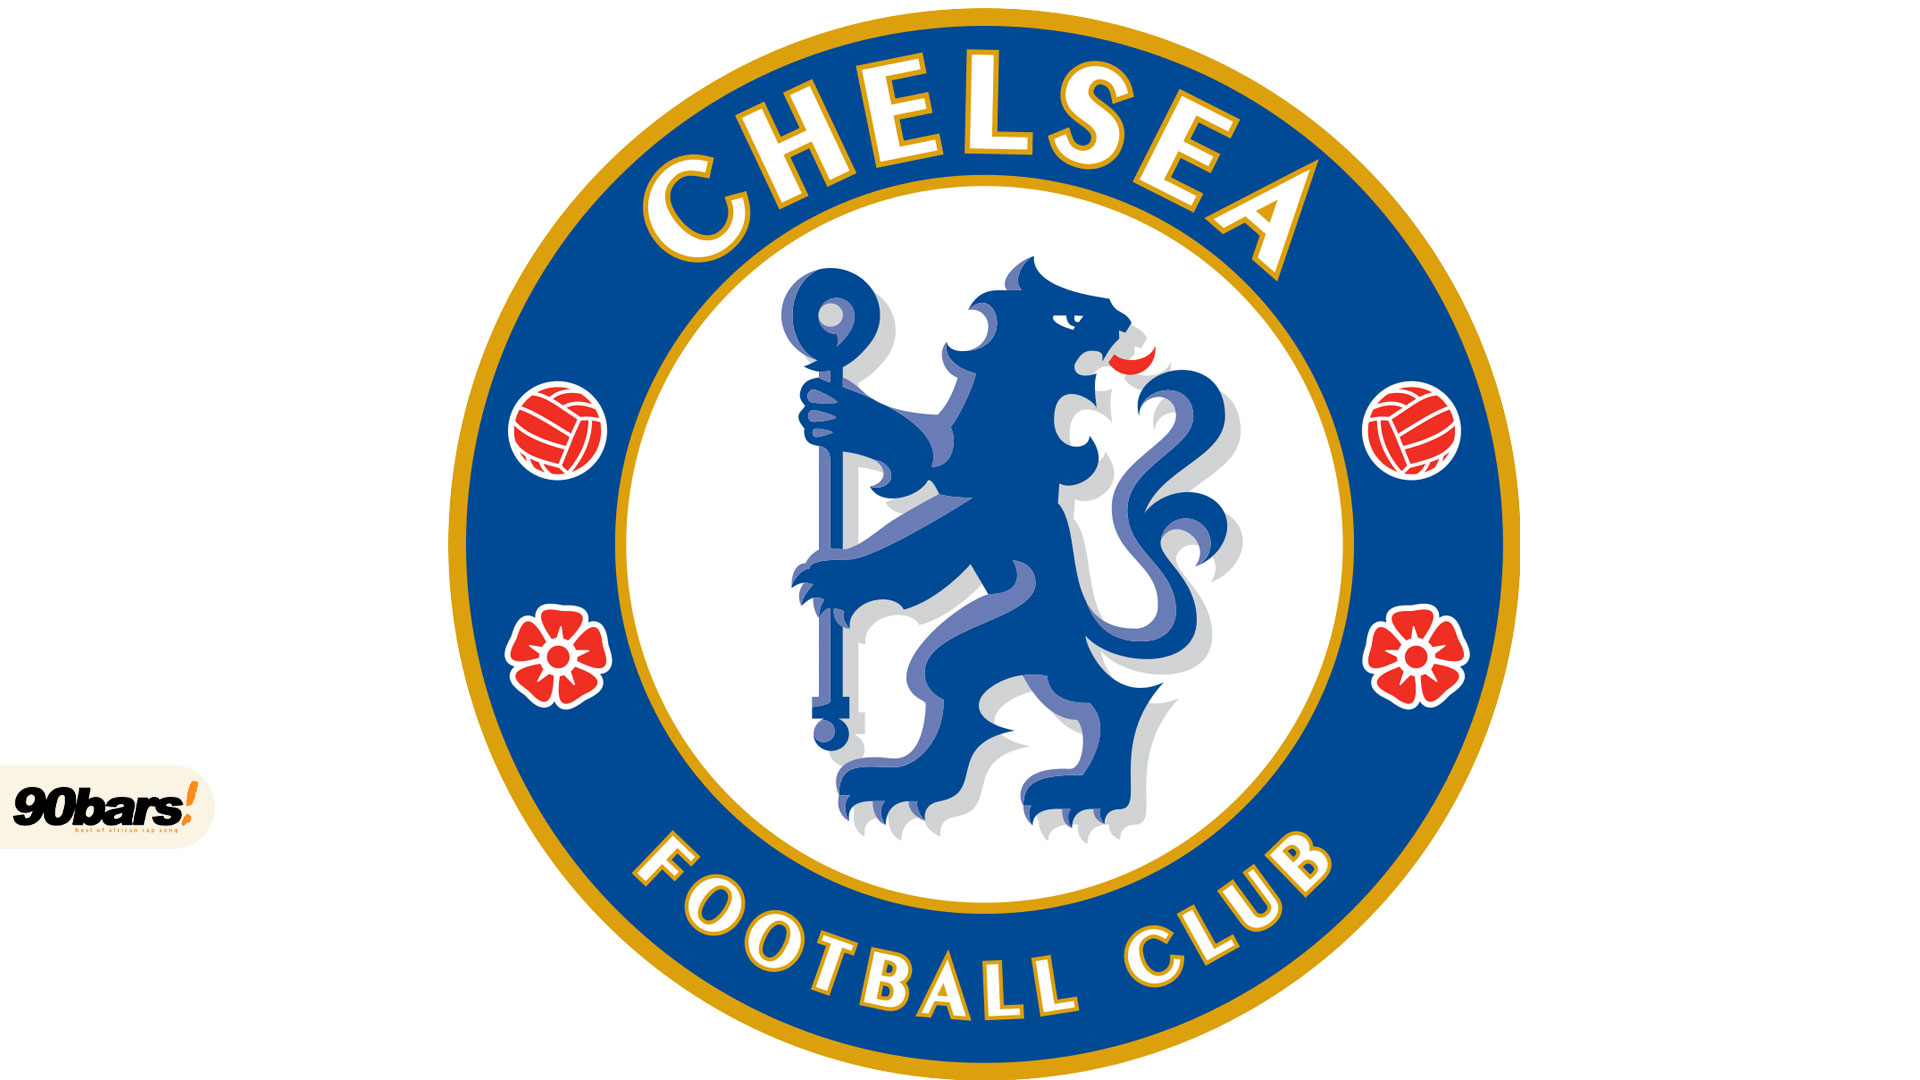 Check Out: The Latest Audition Of Chelsea Squad To Their UEFA Champions League